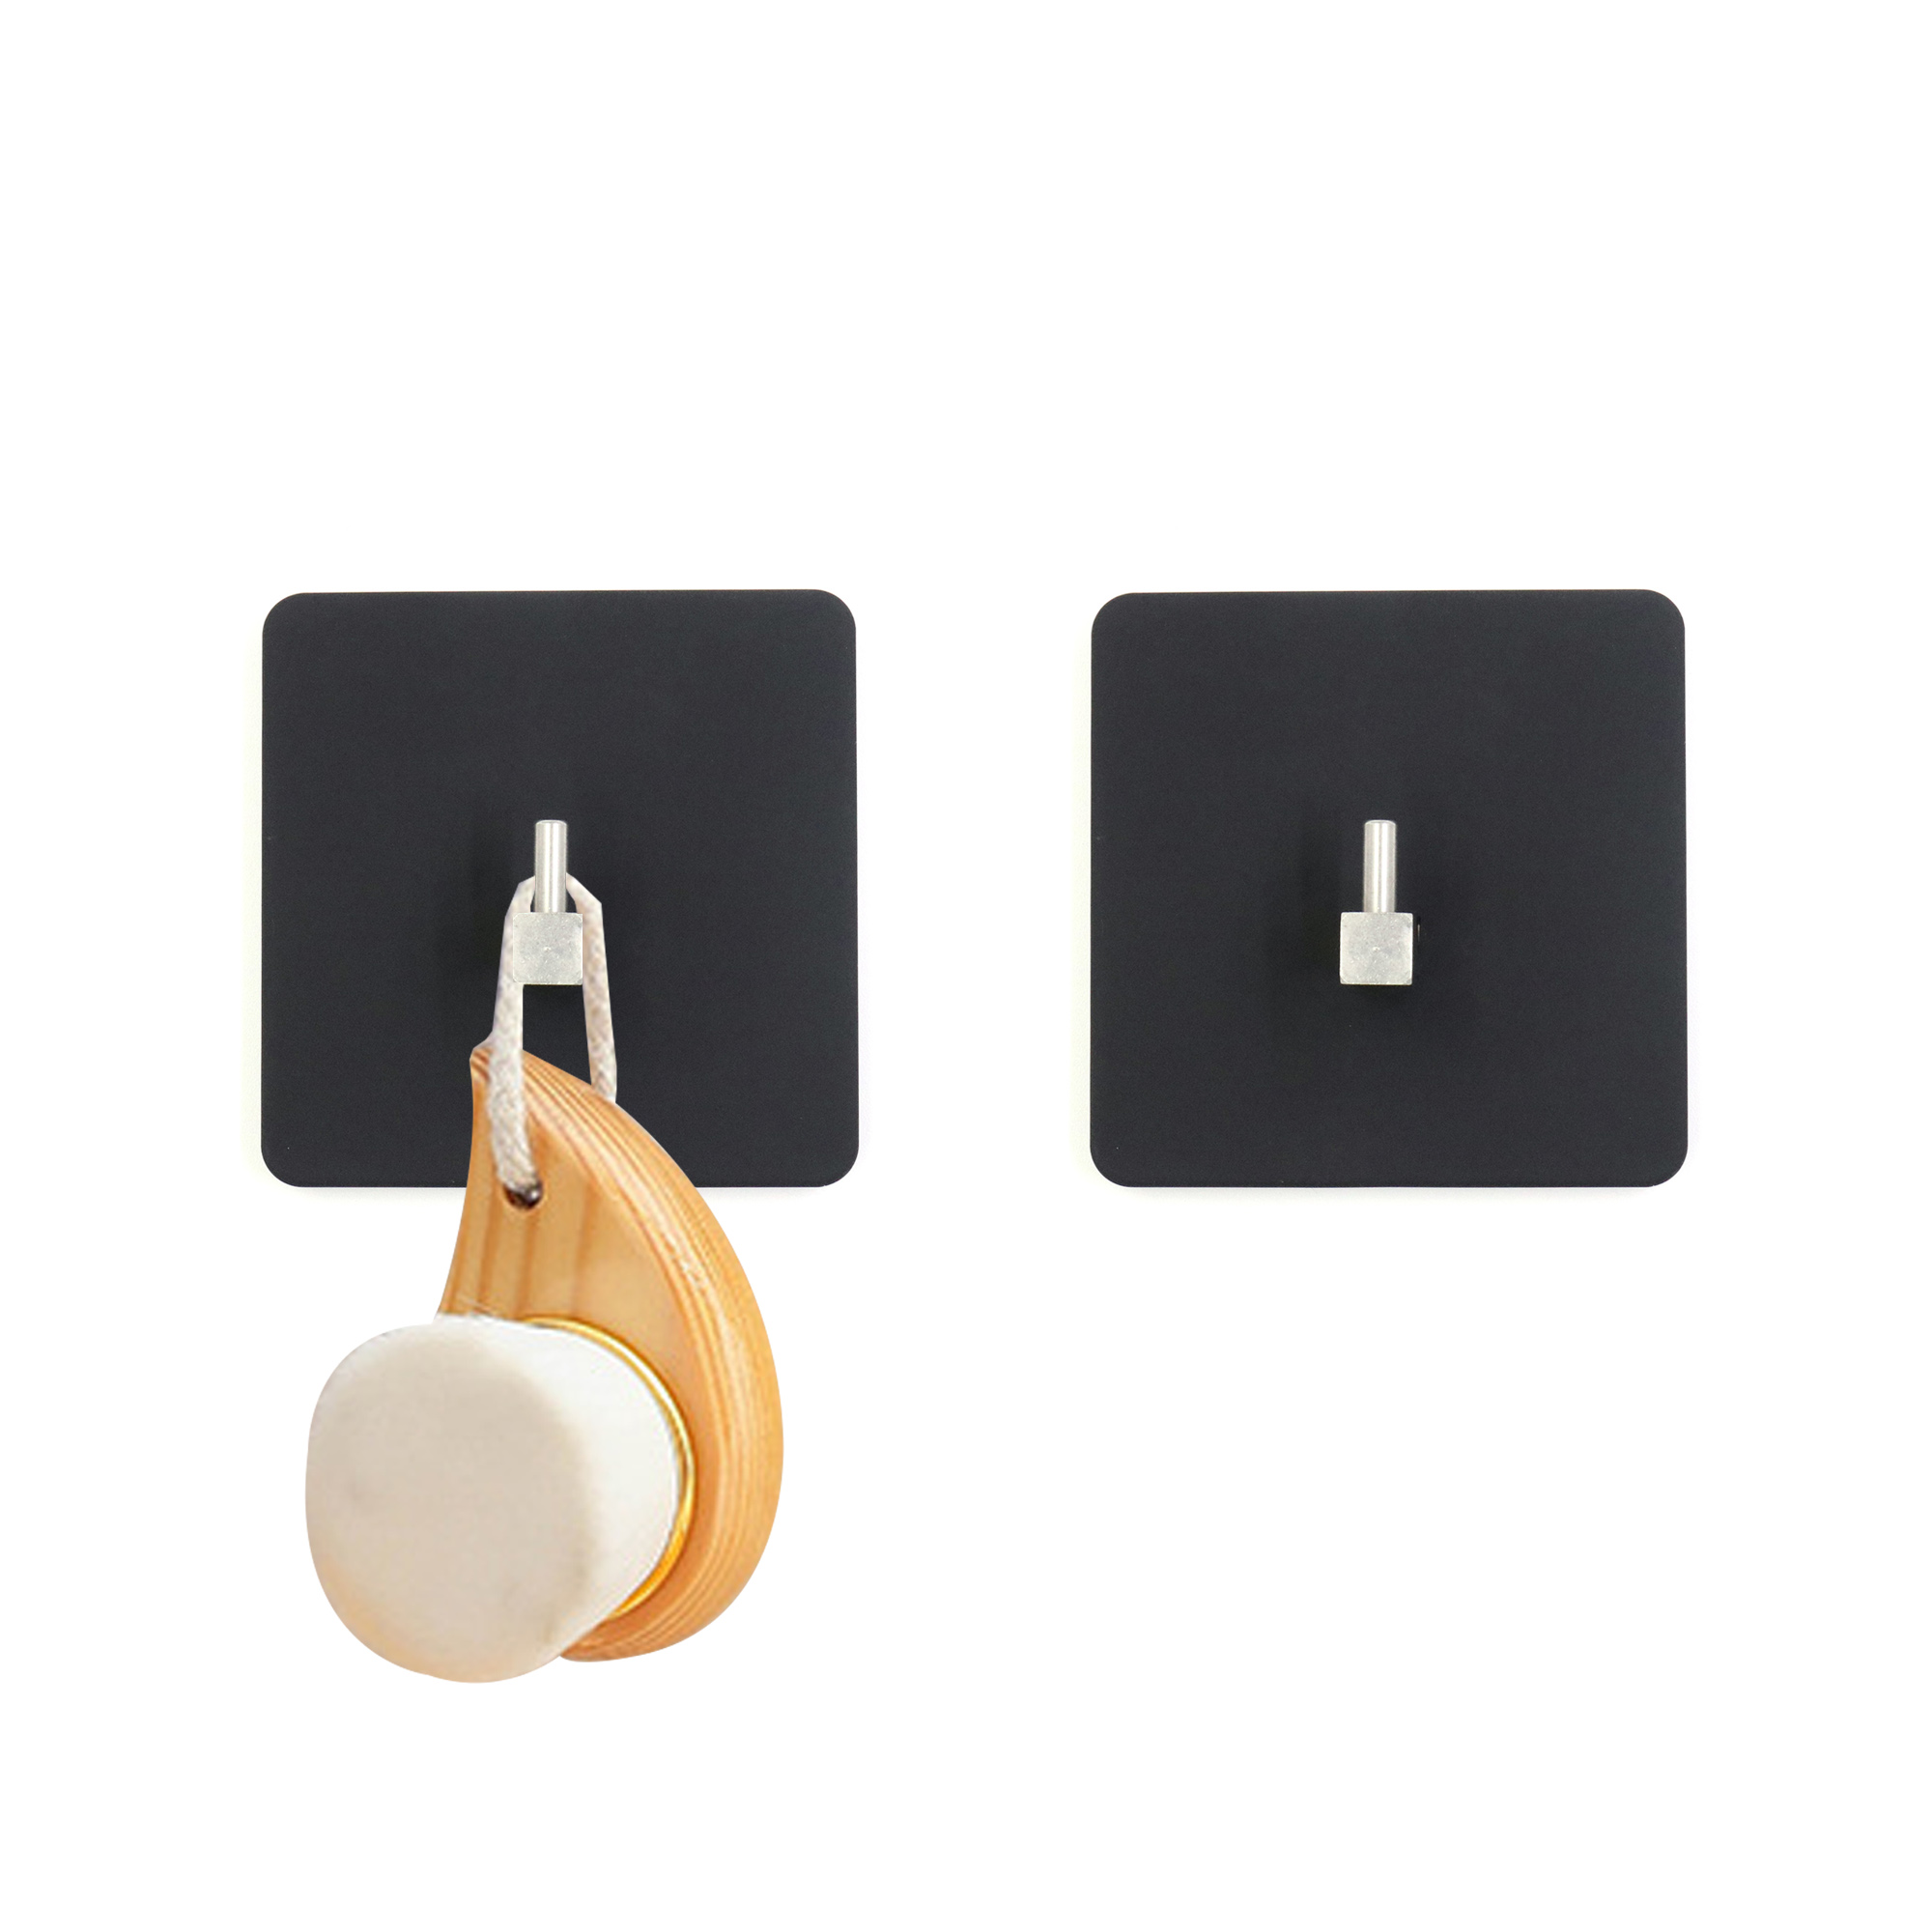 A Fusion of Elegance and Utility The Square Silicone Hook